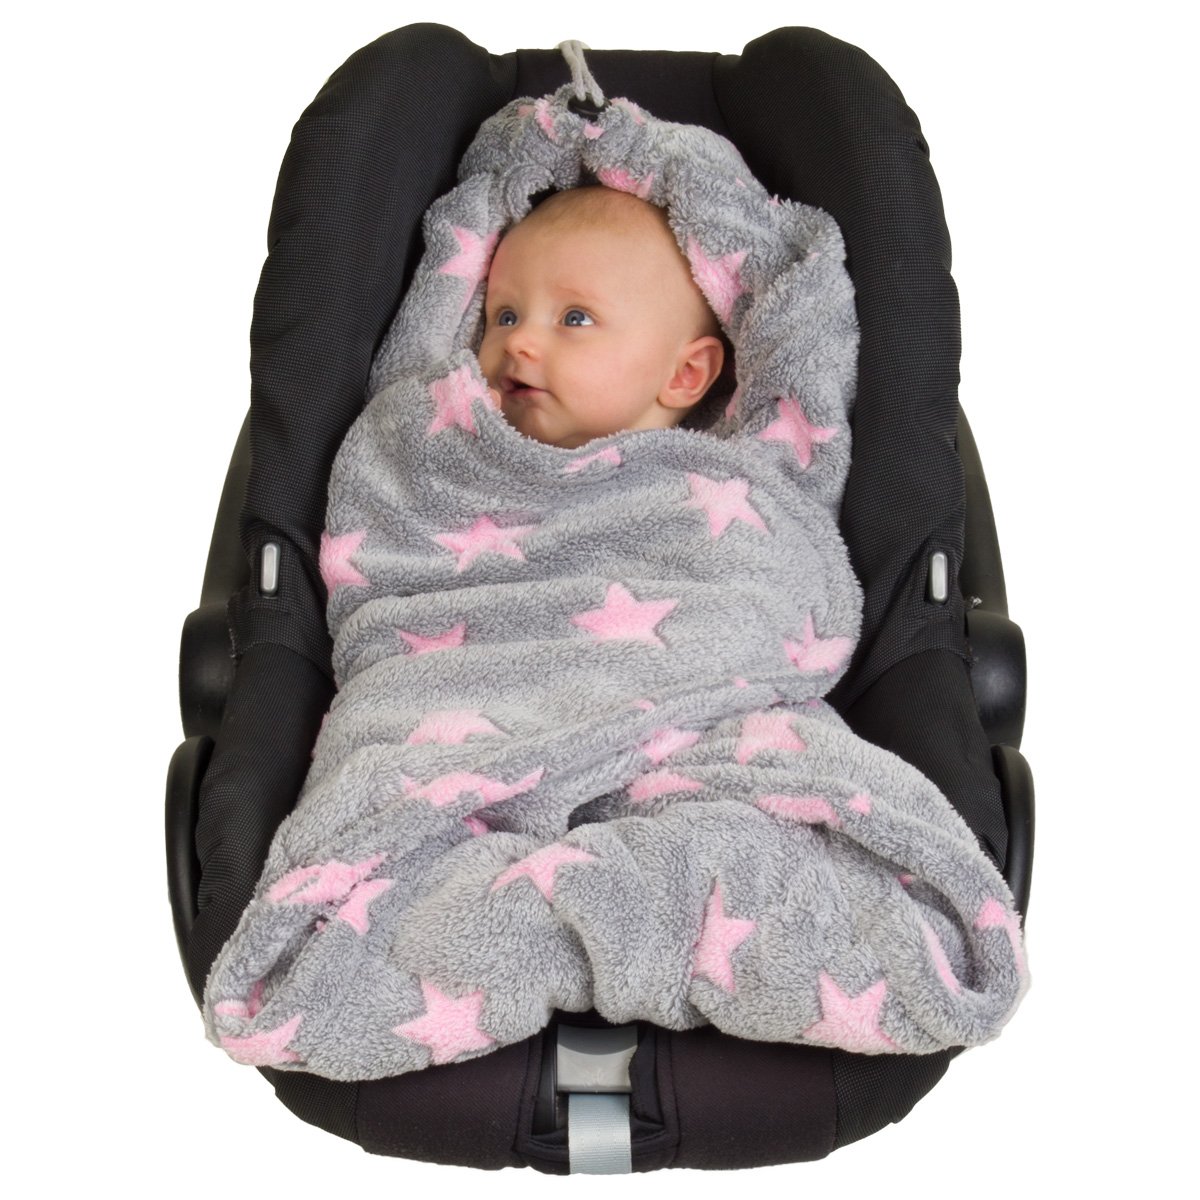 HOPPEDIZ Fleece Blanket for 3 & 5 Point Harness Systems Impact / Car / Crawling Blanket Grey / Pink with Stars